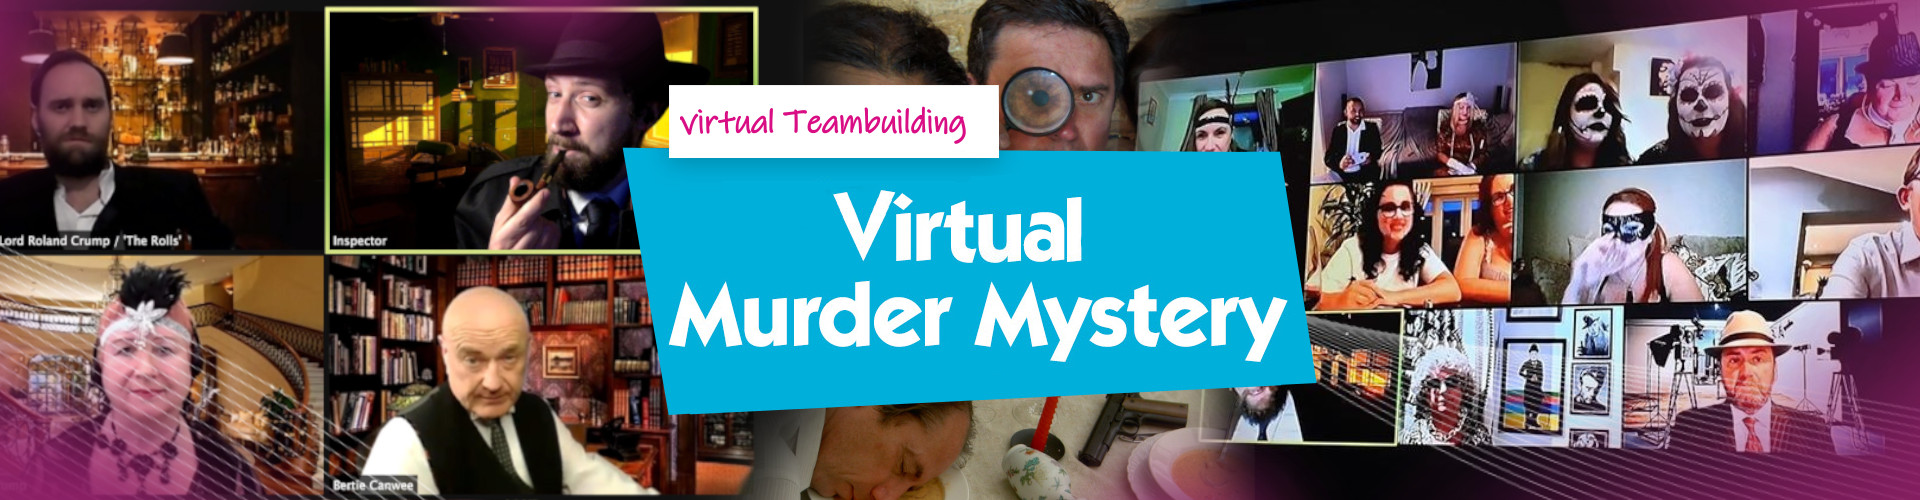 Virtual Murder Mystery Party - The Murder Mystery Co.